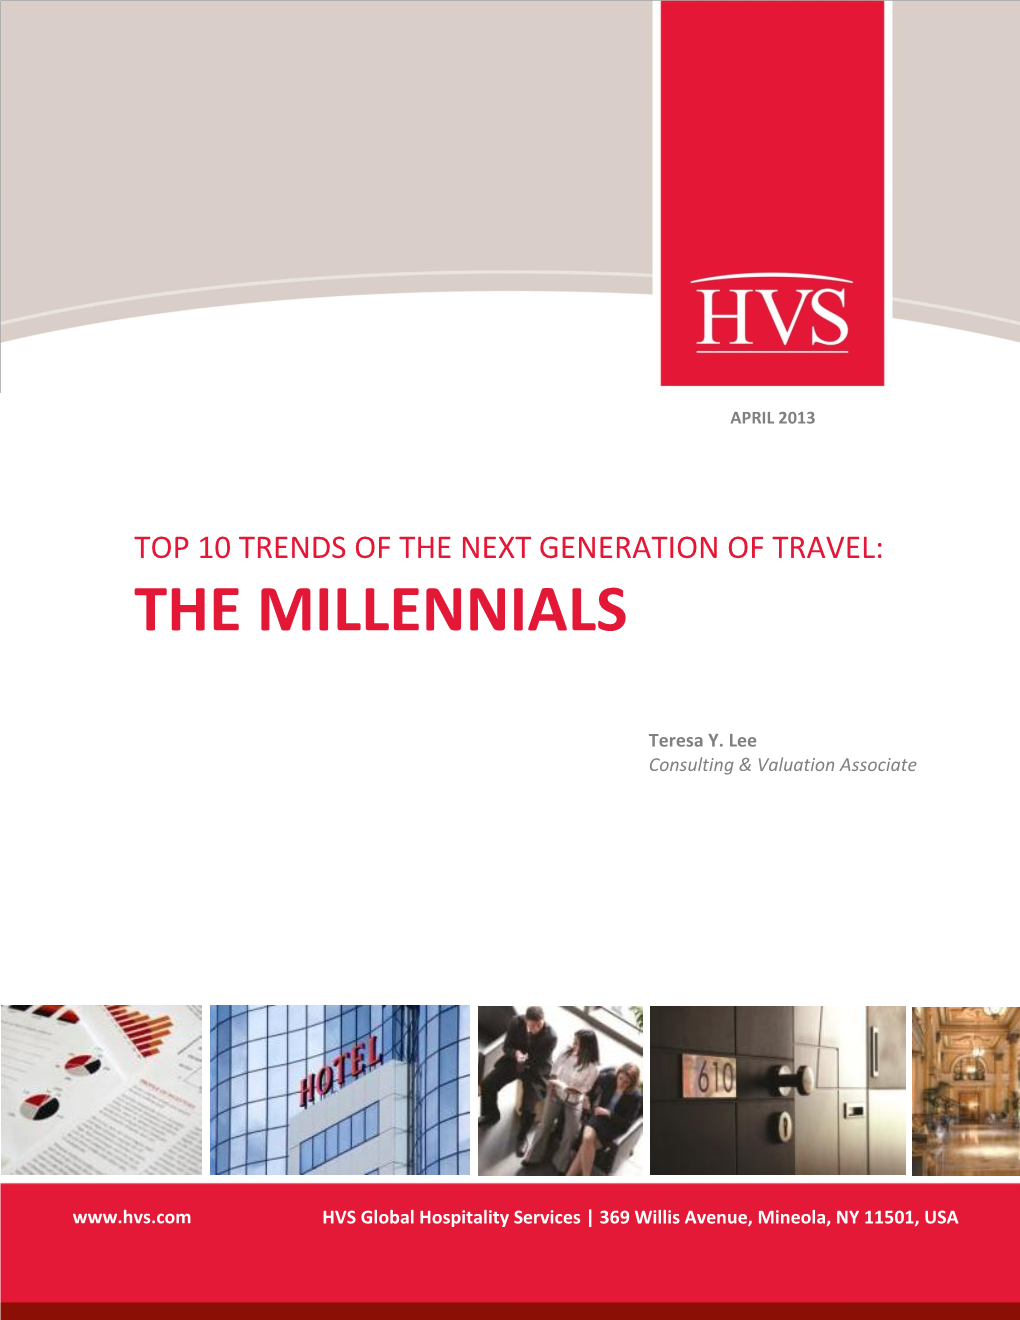 Top 10 Trends of the Next Generation of Travel: the Millennials